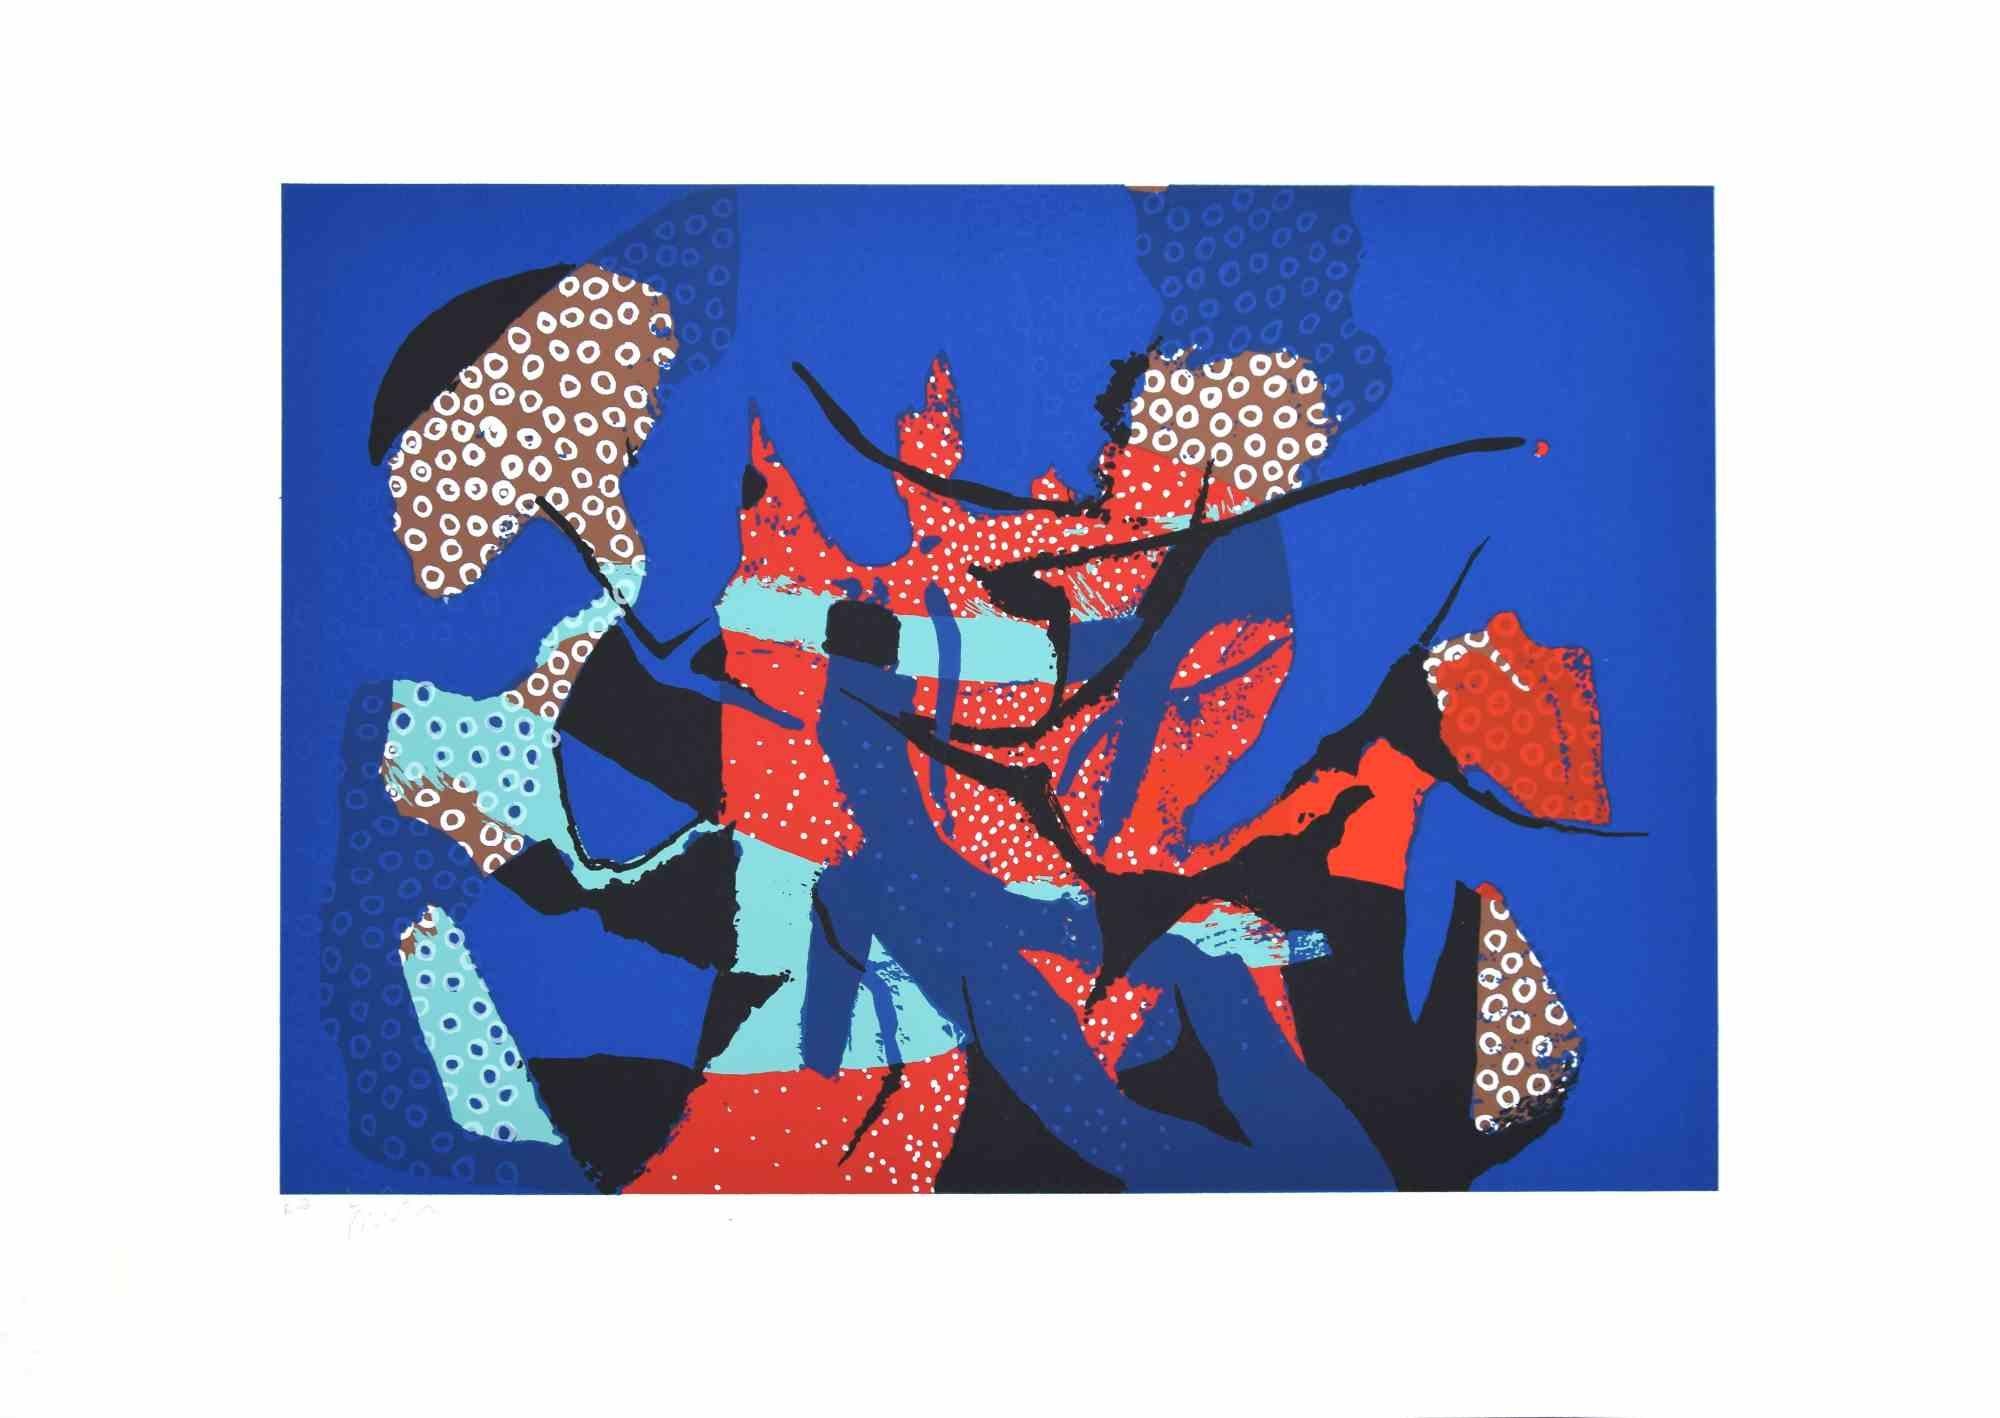 Abstract Composition - Original Screen Print by Wladimiro Tulli - 1970s